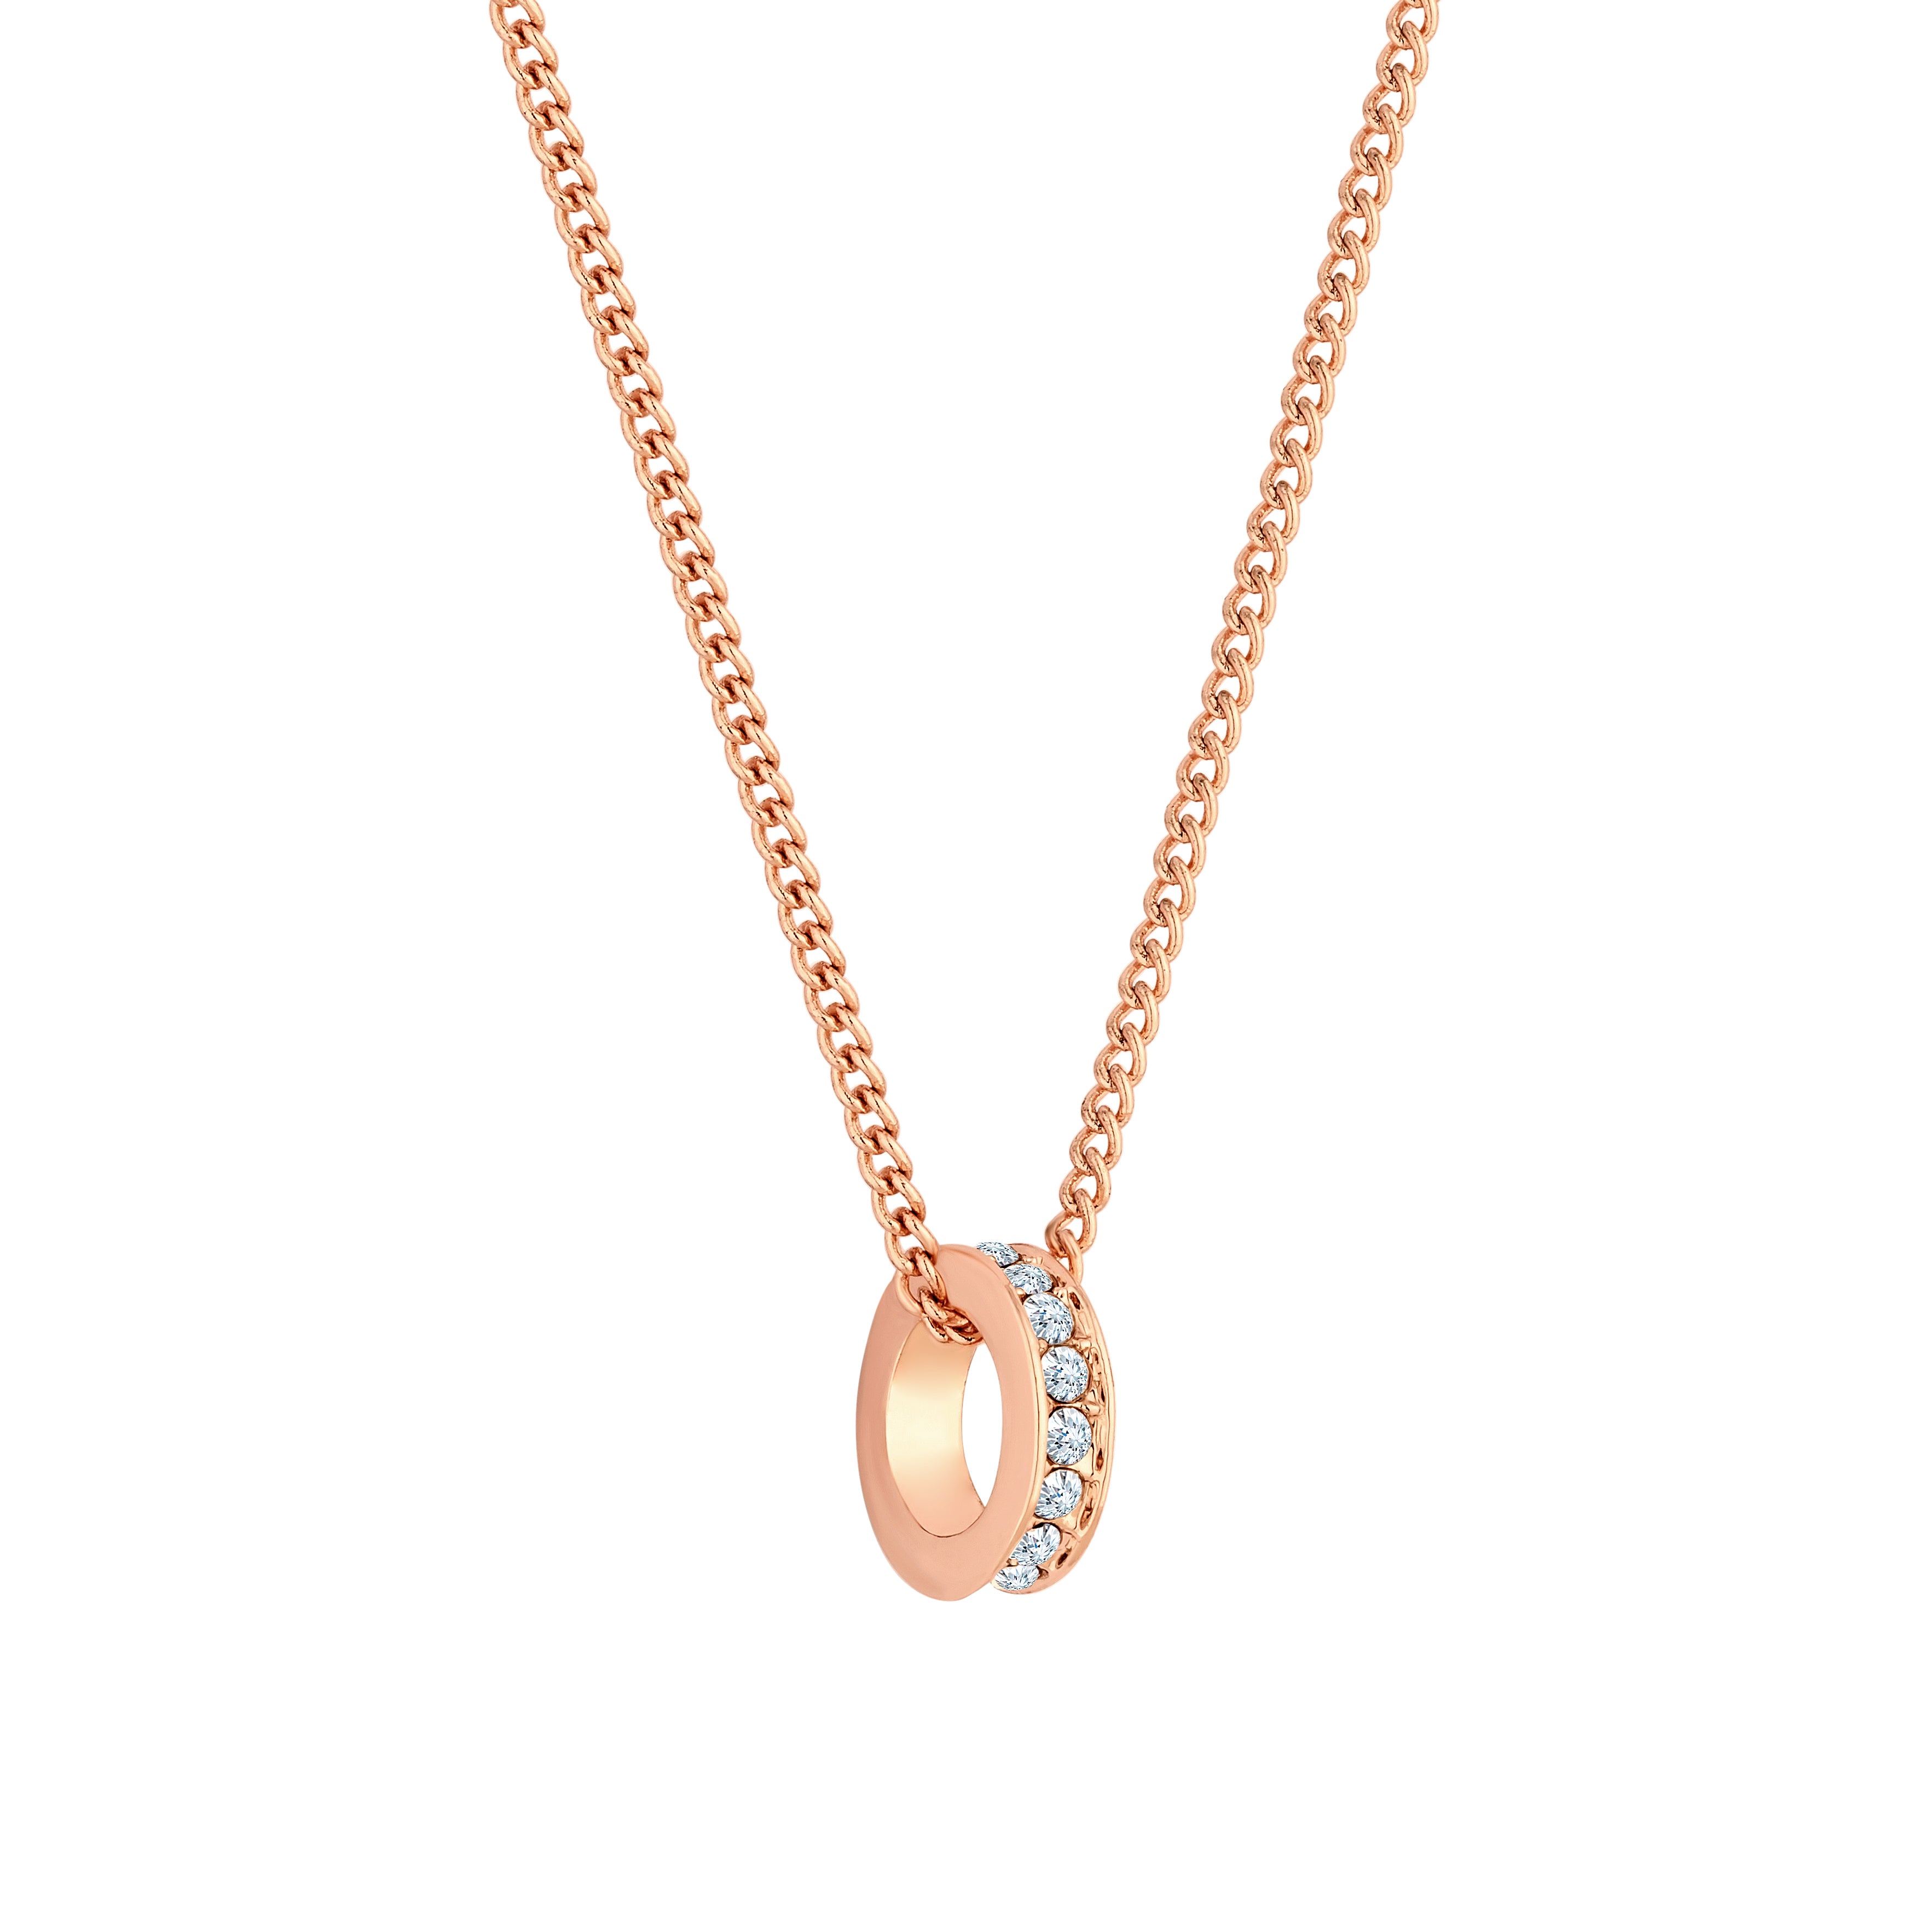 Domino Pendant in Rose Gold Plate